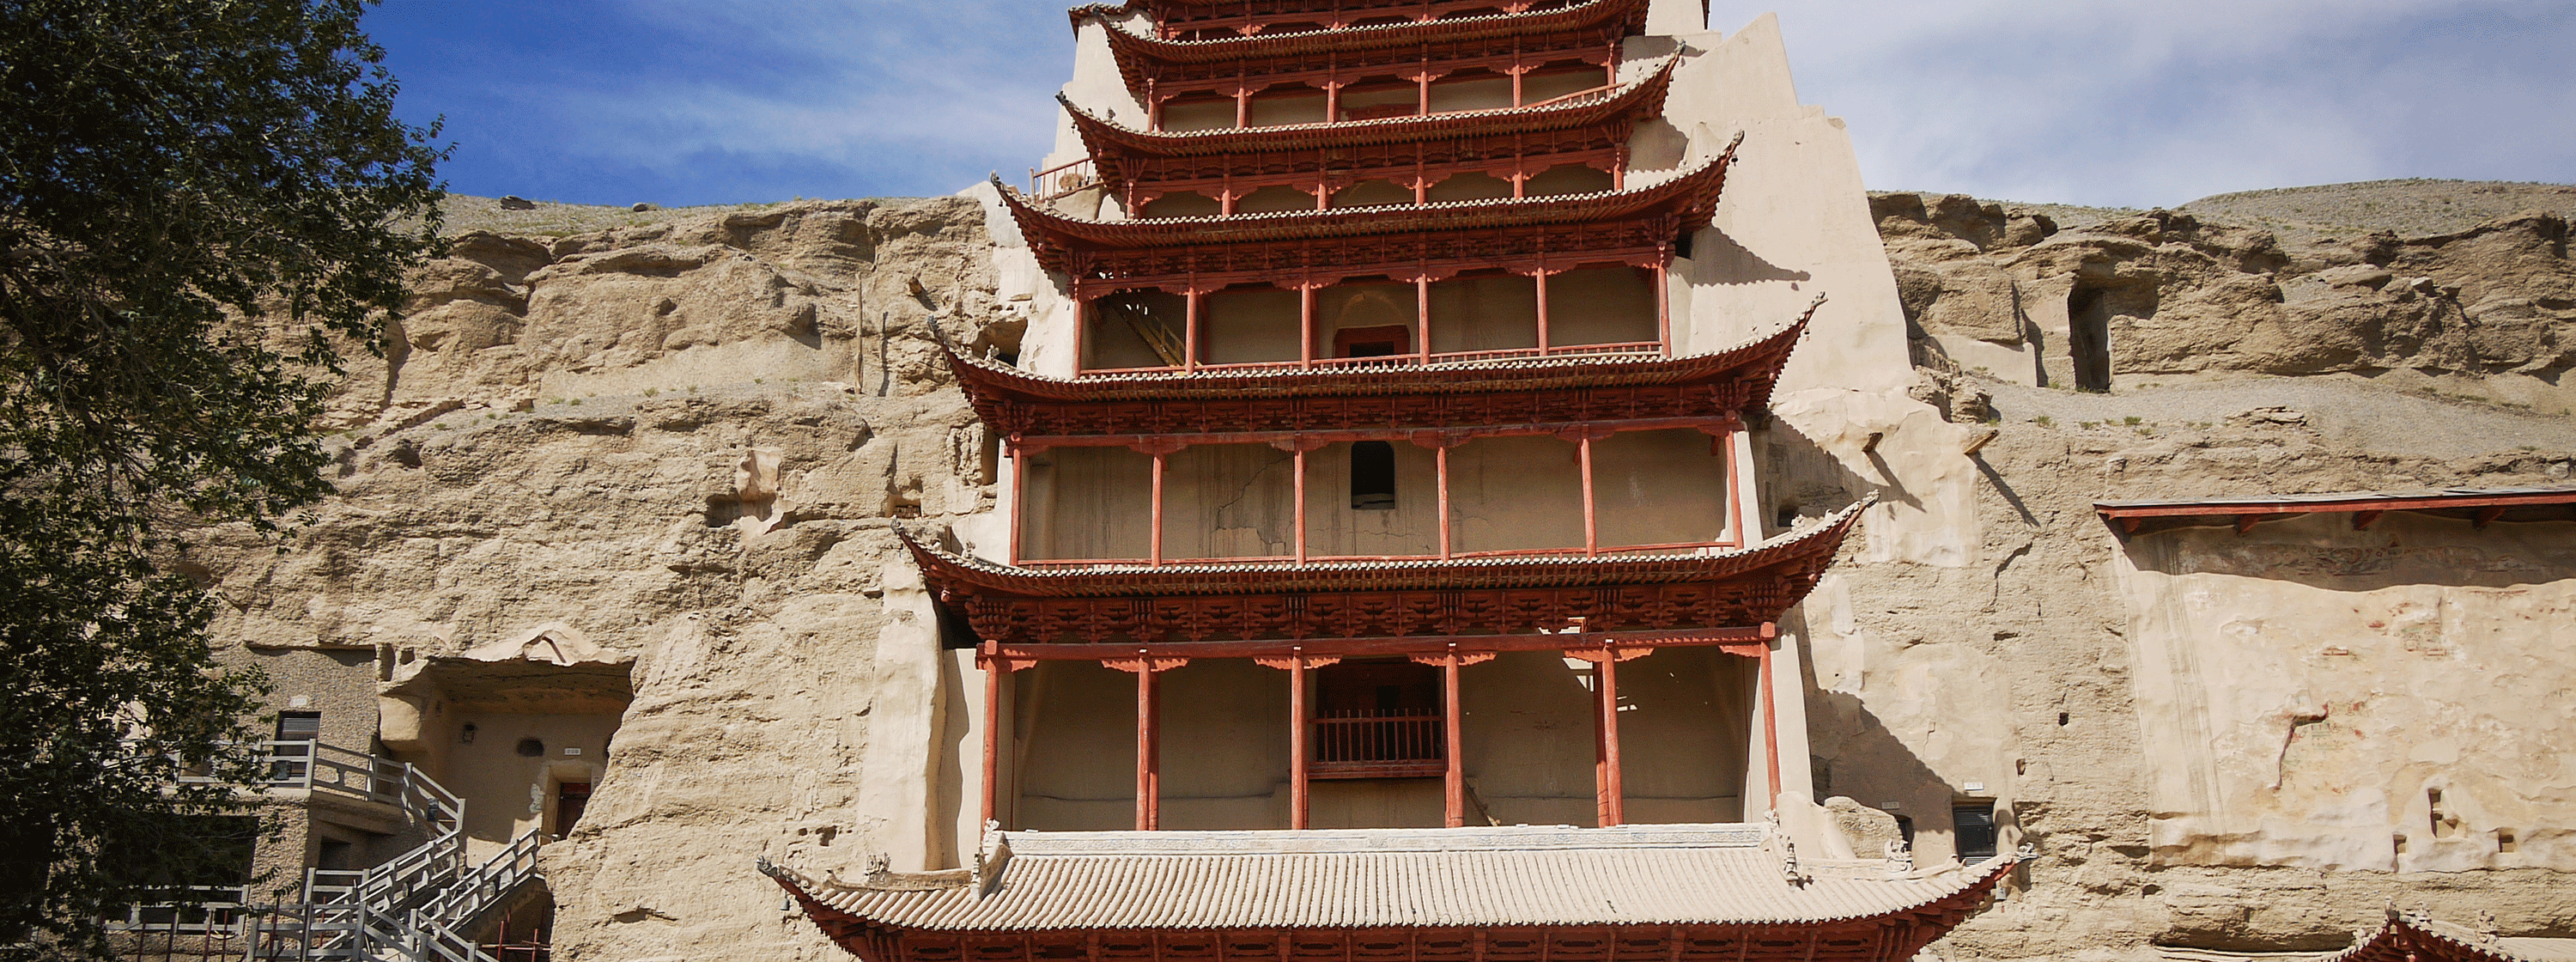 /resource/Images/china/headerimage/Mogao-Grottoes-Dunhuang_1.png